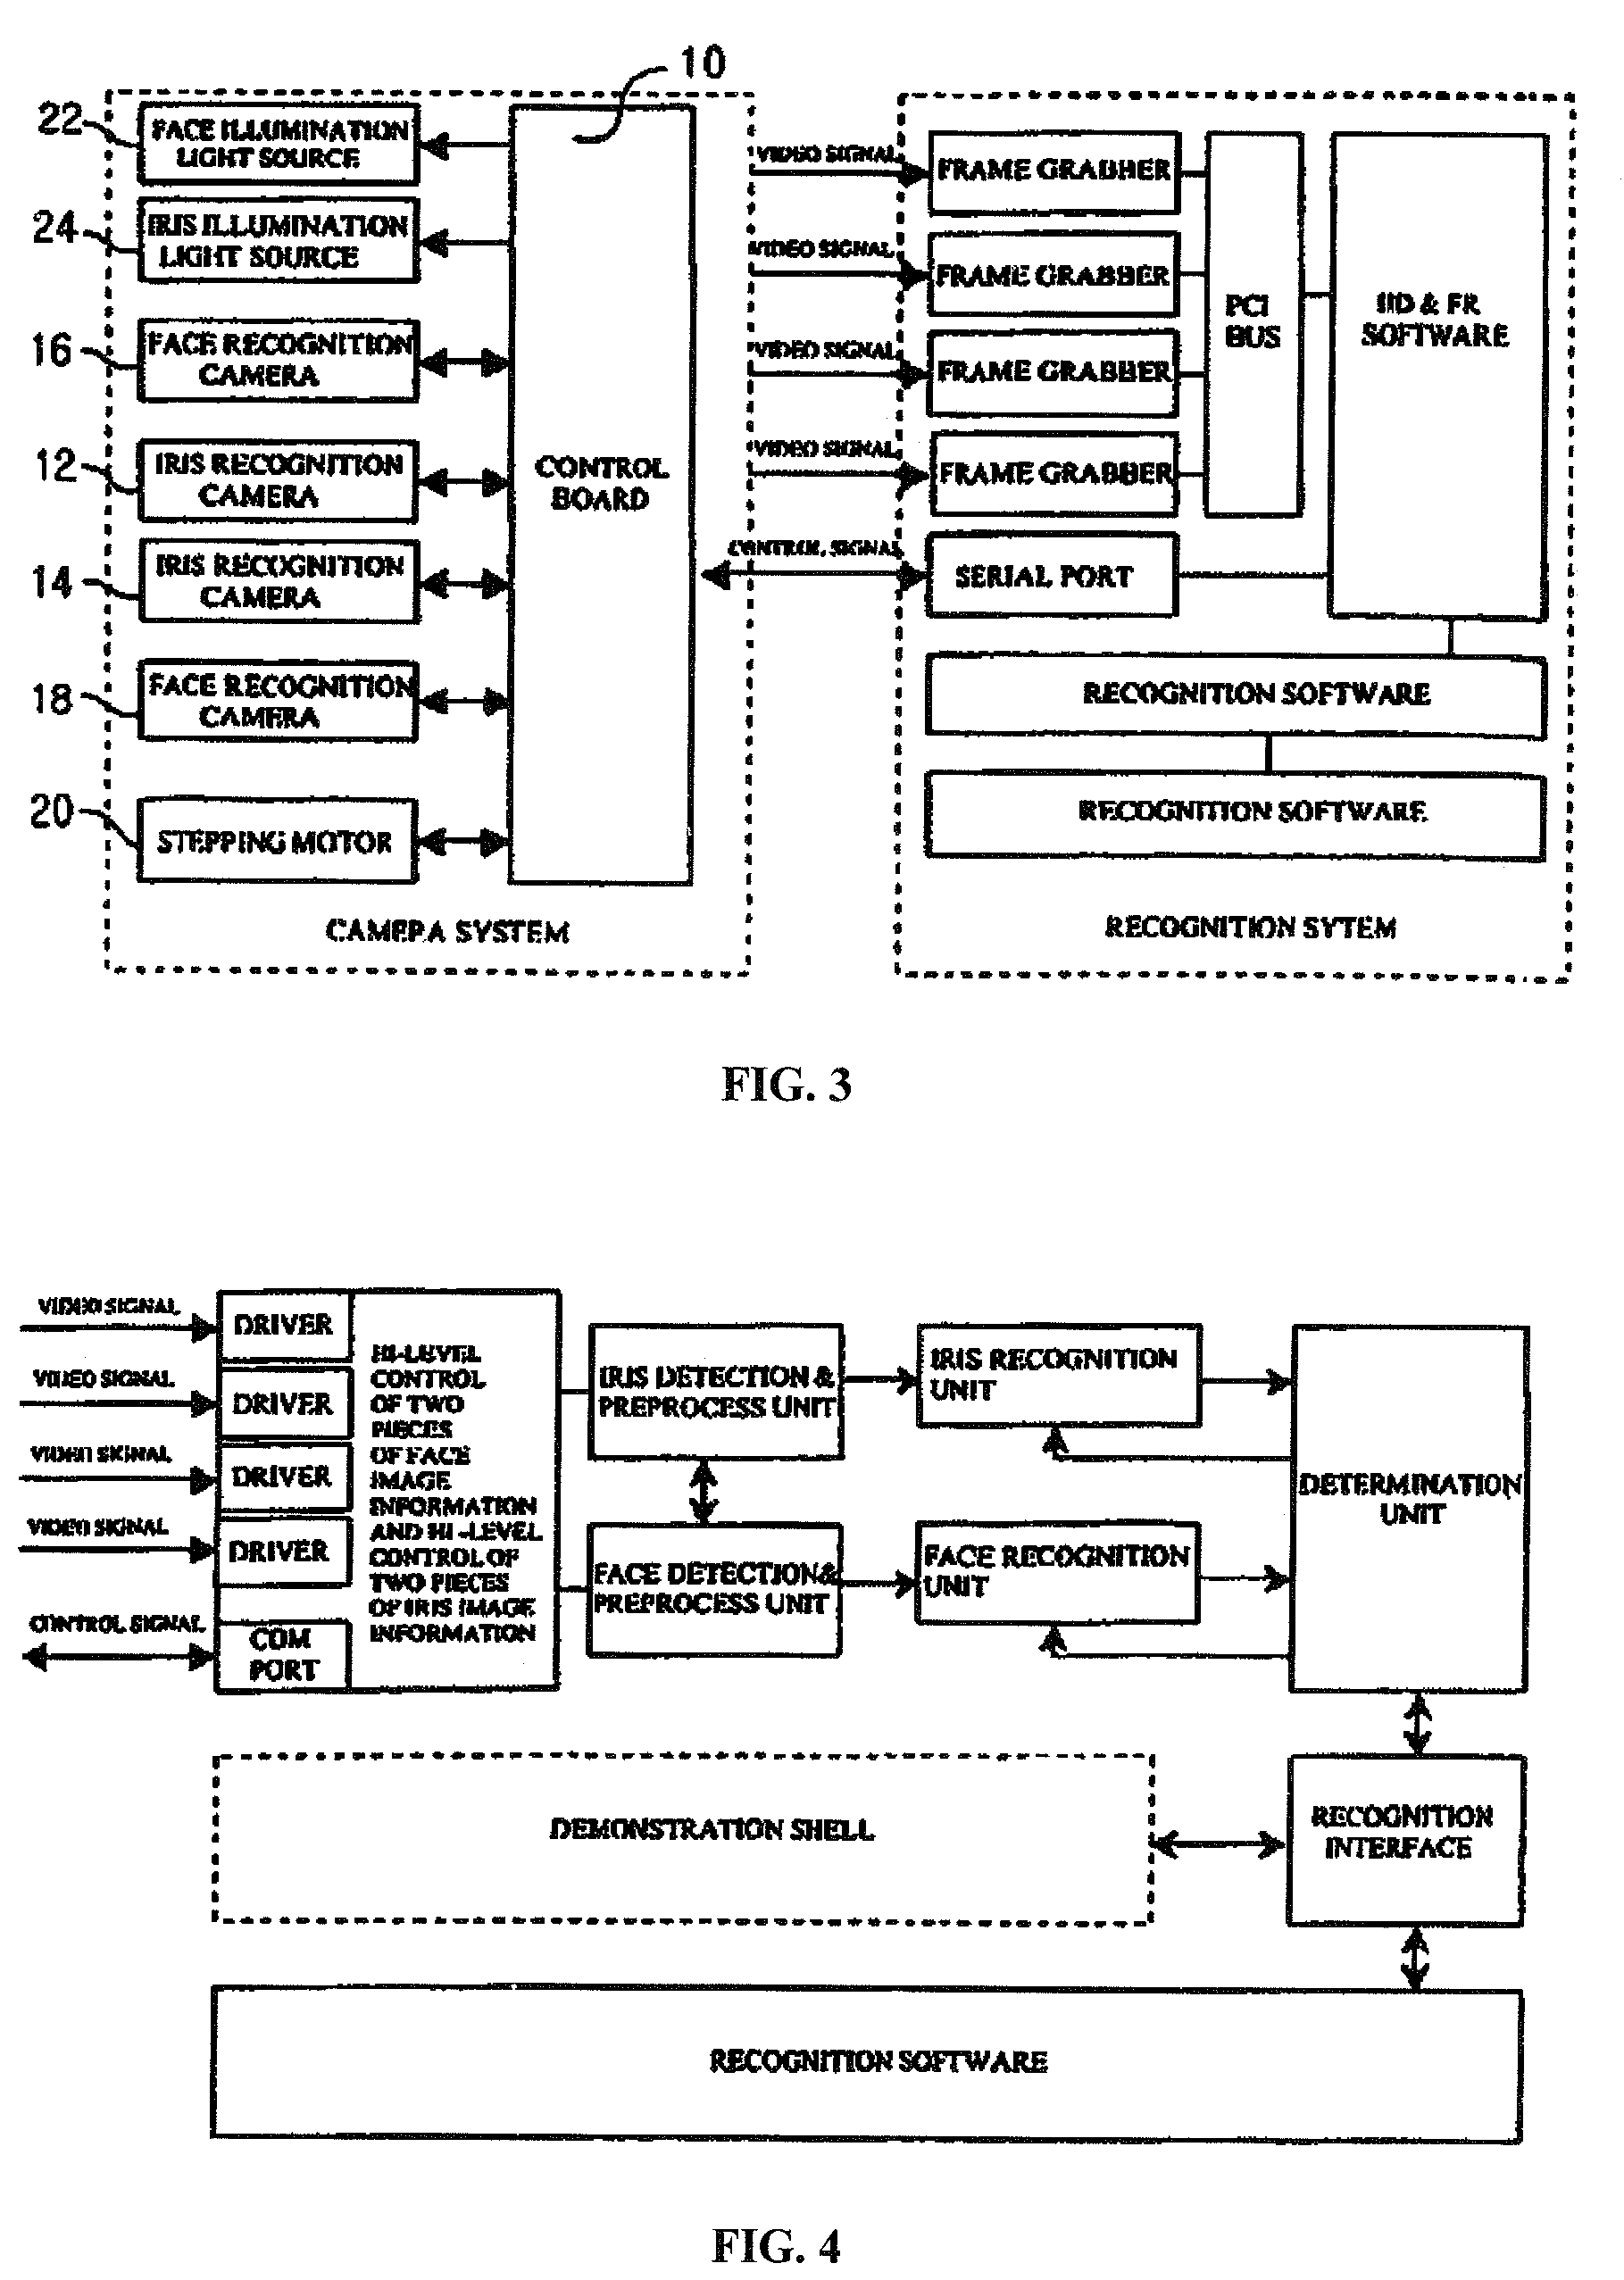 System and method for iris identification using stereoscopic face recognition